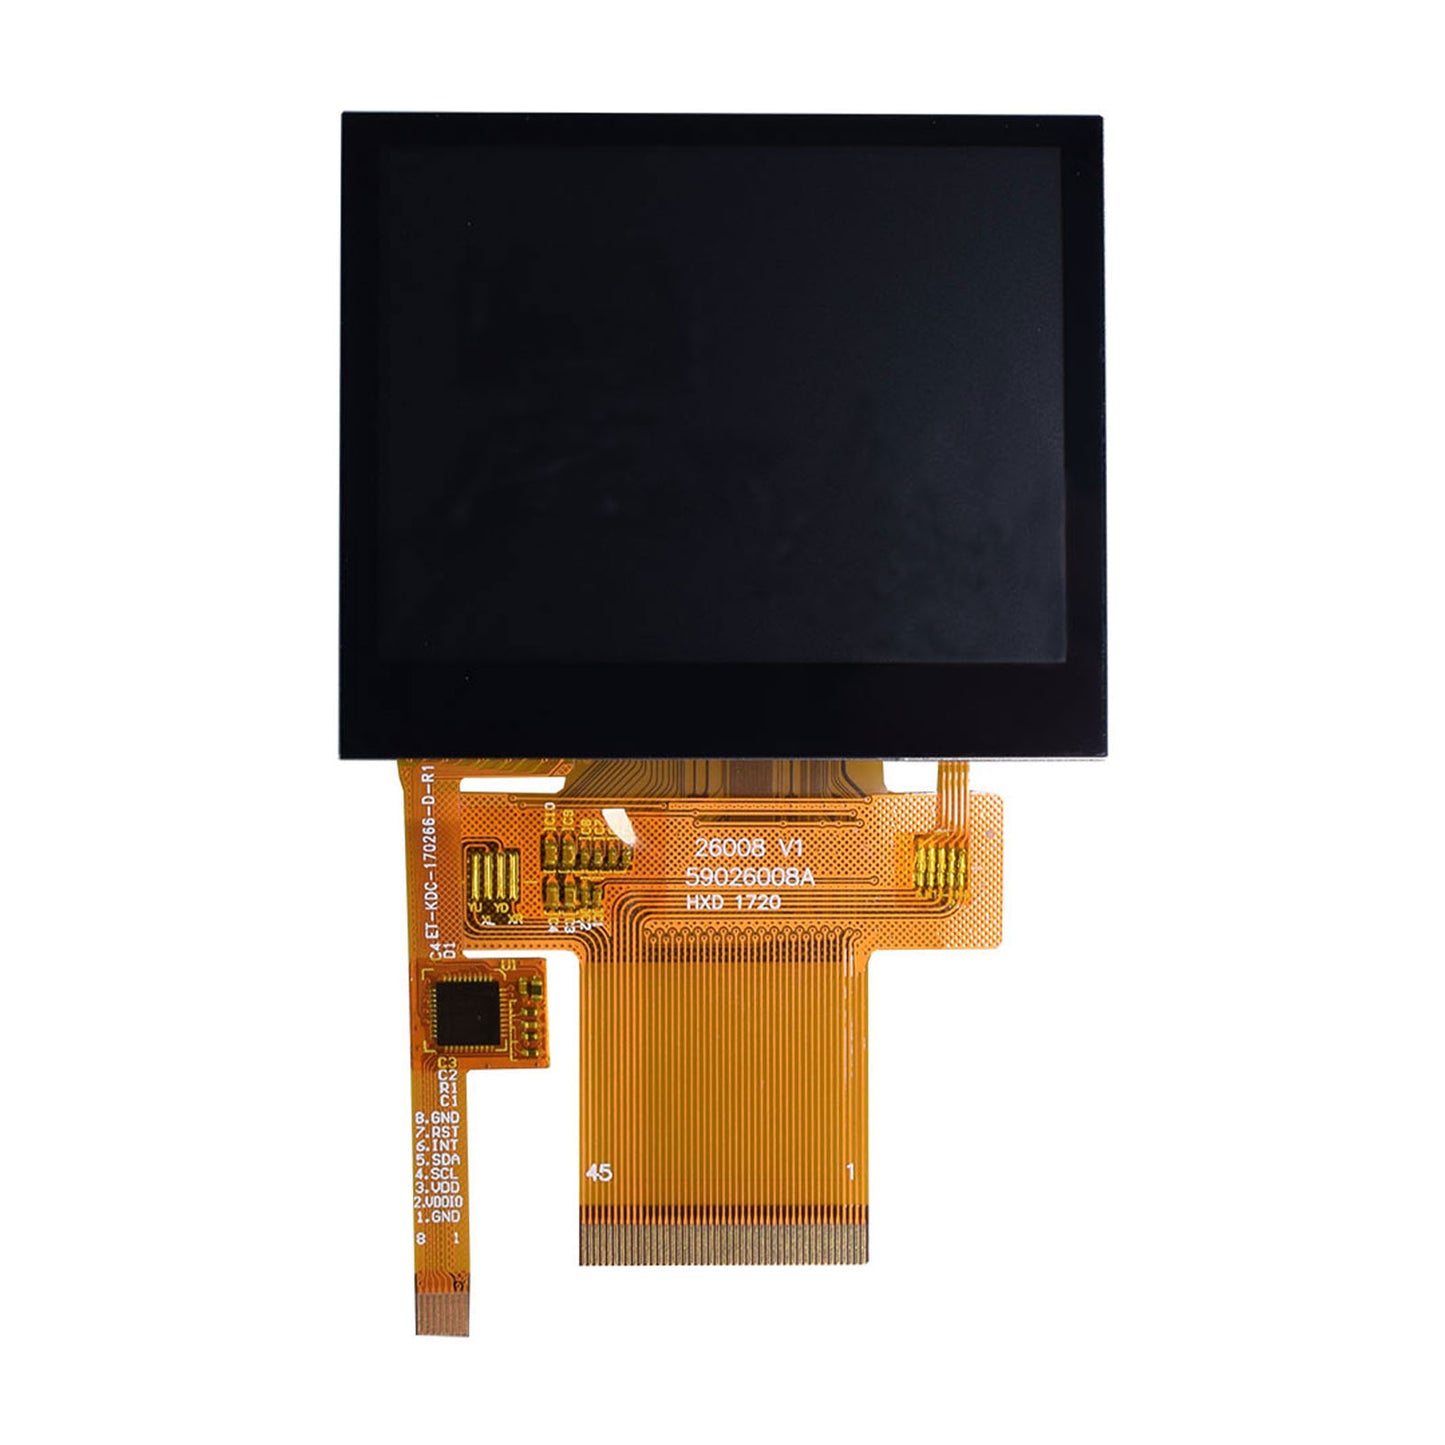 DisplayModule 2.6" 320x240 Display Panel with Capacitive Touch - SPI, MCU, RGB